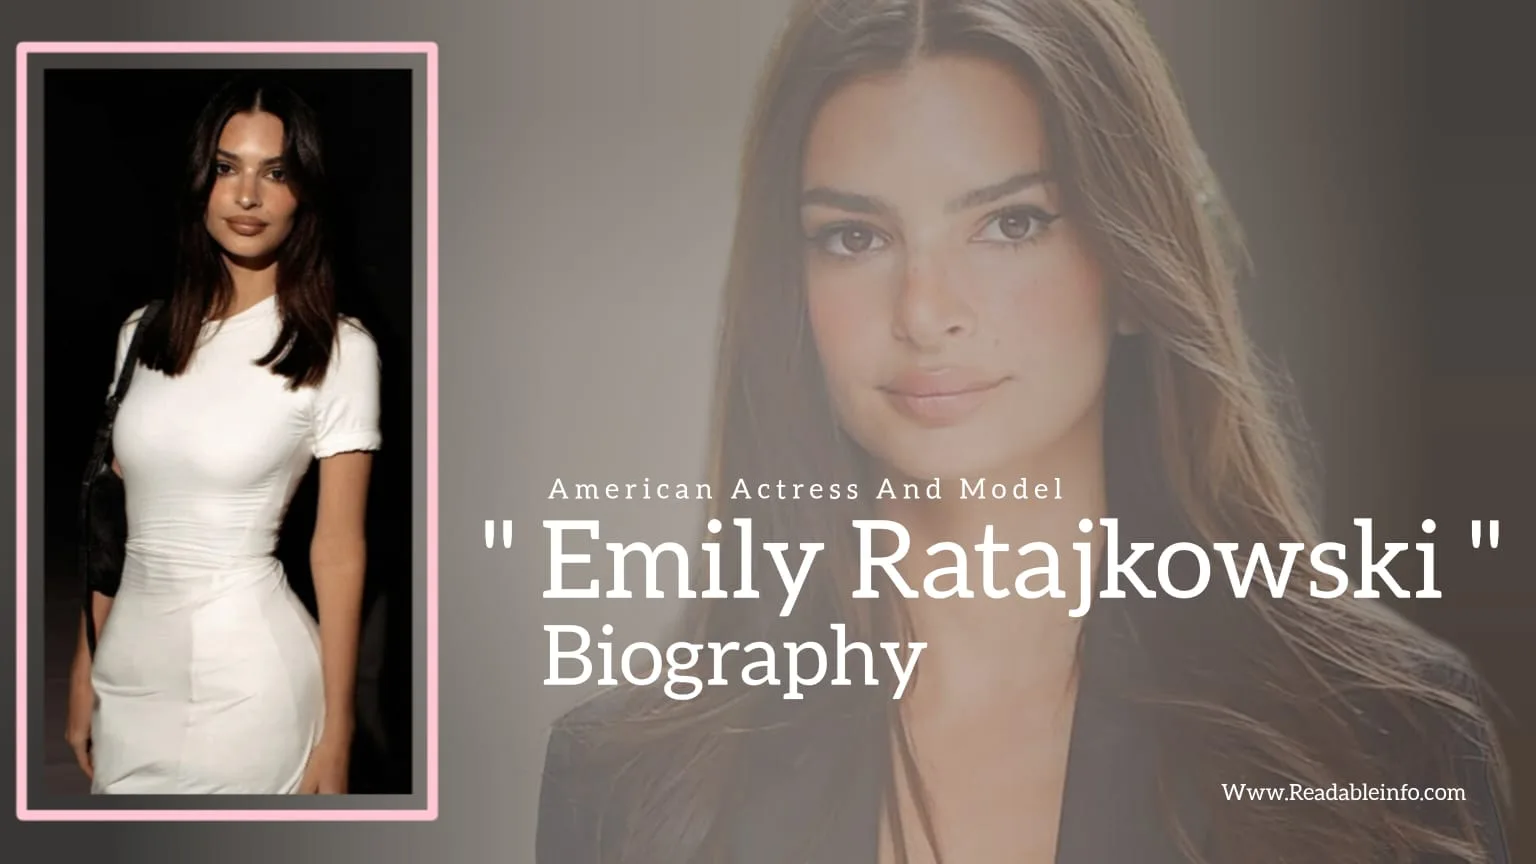 You are currently viewing Emily Ratajkowski Biography (American Actress and Model)